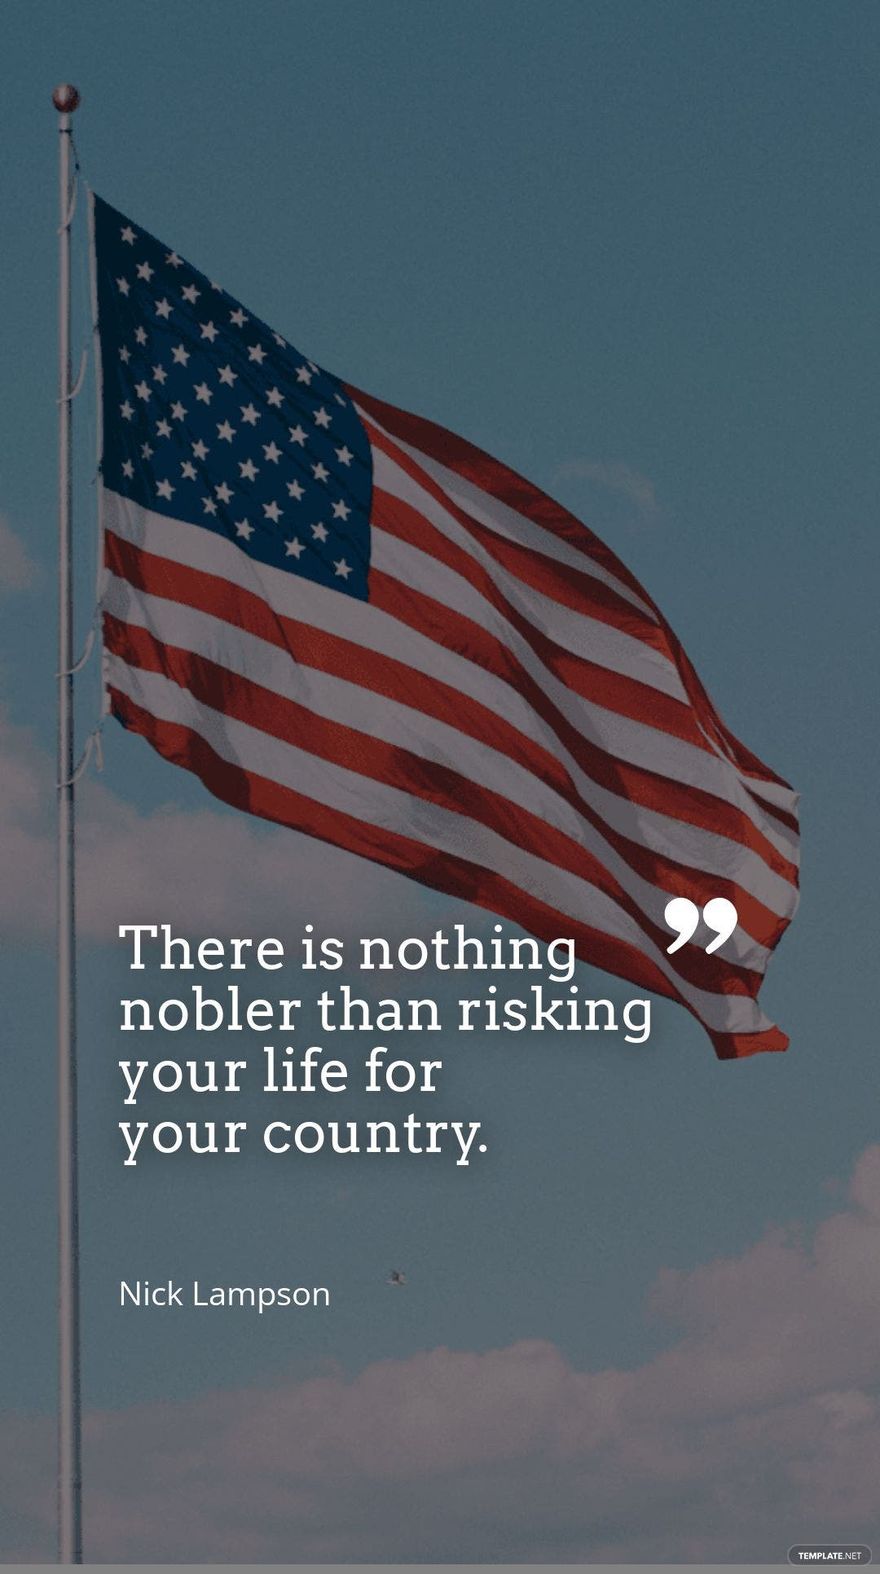 Nick Lampson - There is nothing nobler than risking your life for your country. in JPG